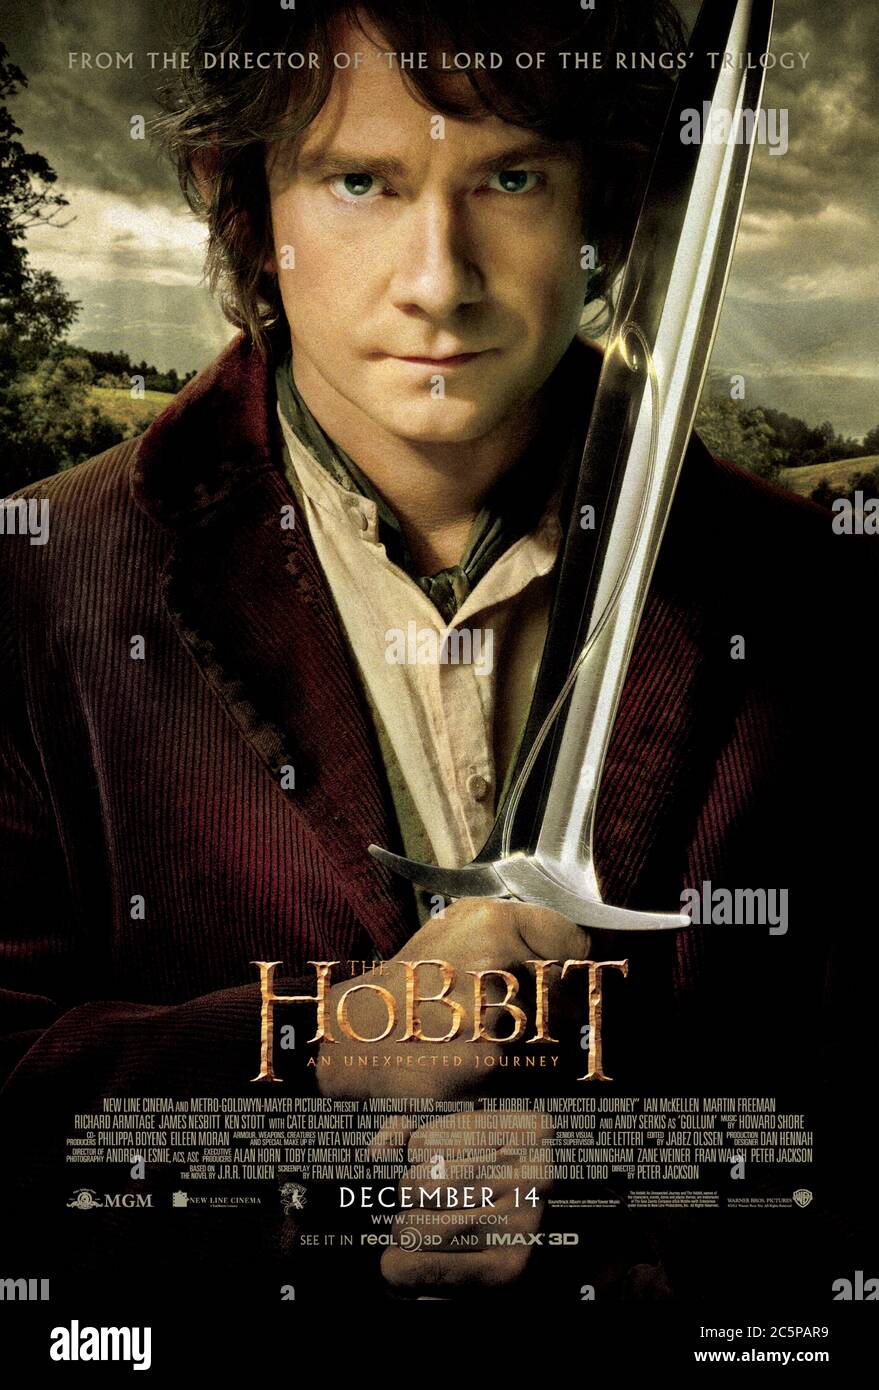 The Hobbit: An Unexpected Journey (2012) directed by Peter Jackson and starring Ian McKellen, Martin Freeman, Richard Armitage and James Nesbitt. First part of the trilogy based on J. R. R. Tolkien's book The Hobbit, Bilbo Baggins joins the dwarves to reclaim their home from the dragon Smaug. US one sheet poster ***EDITORIAL USE ONLY***. Credit: BFA / Warner Bros Stock Photo